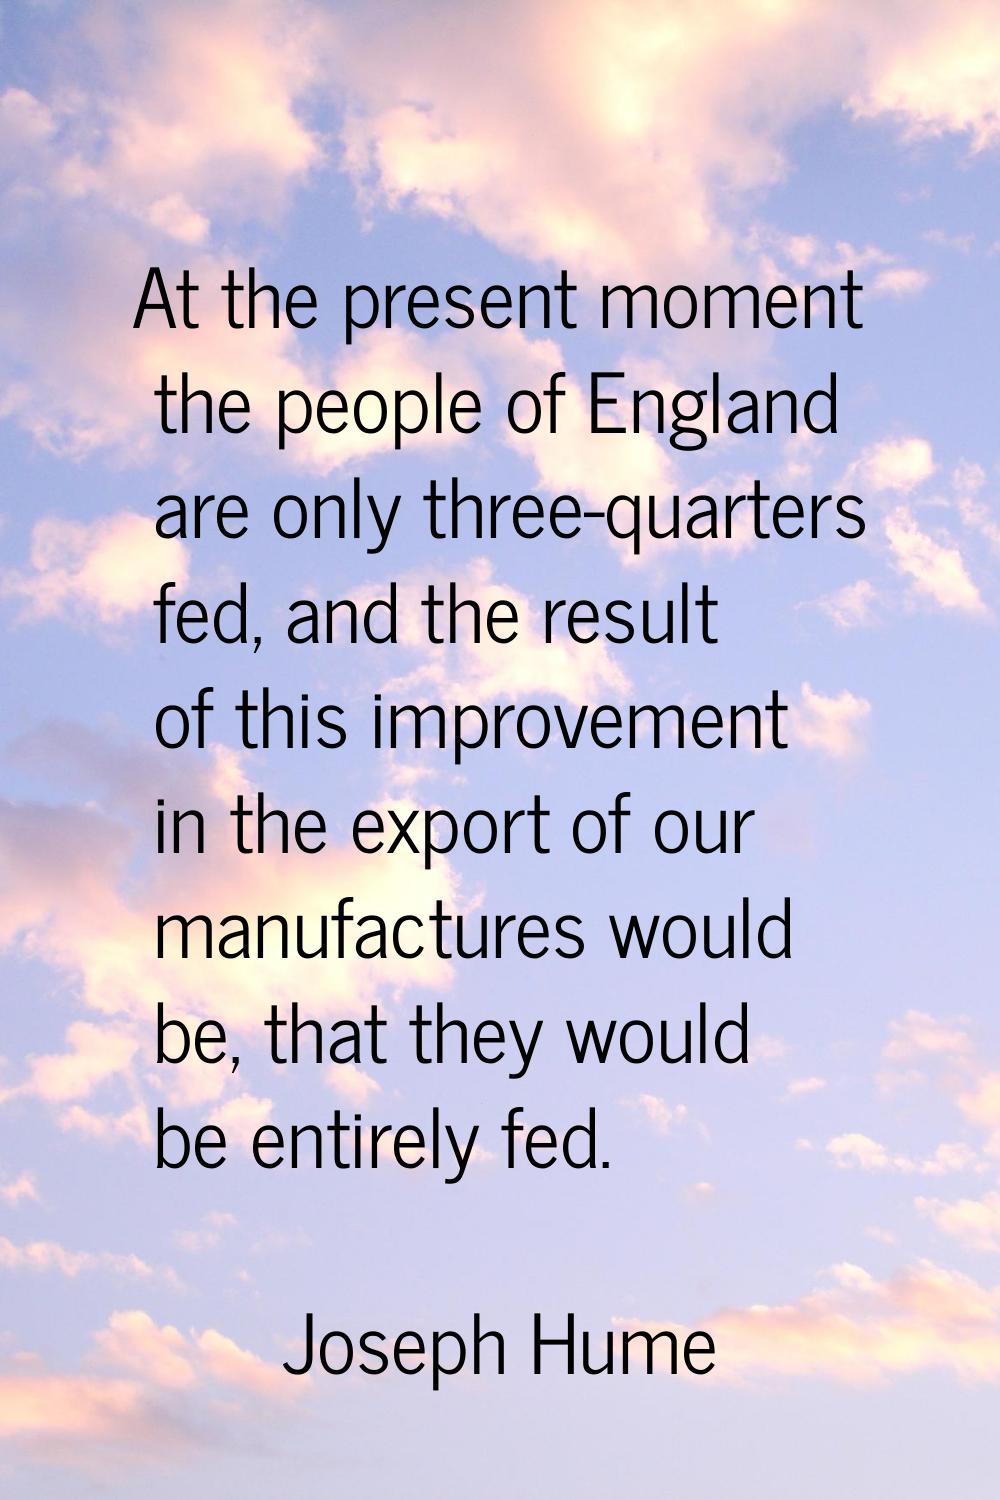 At the present moment the people of England are only three-quarters fed, and the result of this imp